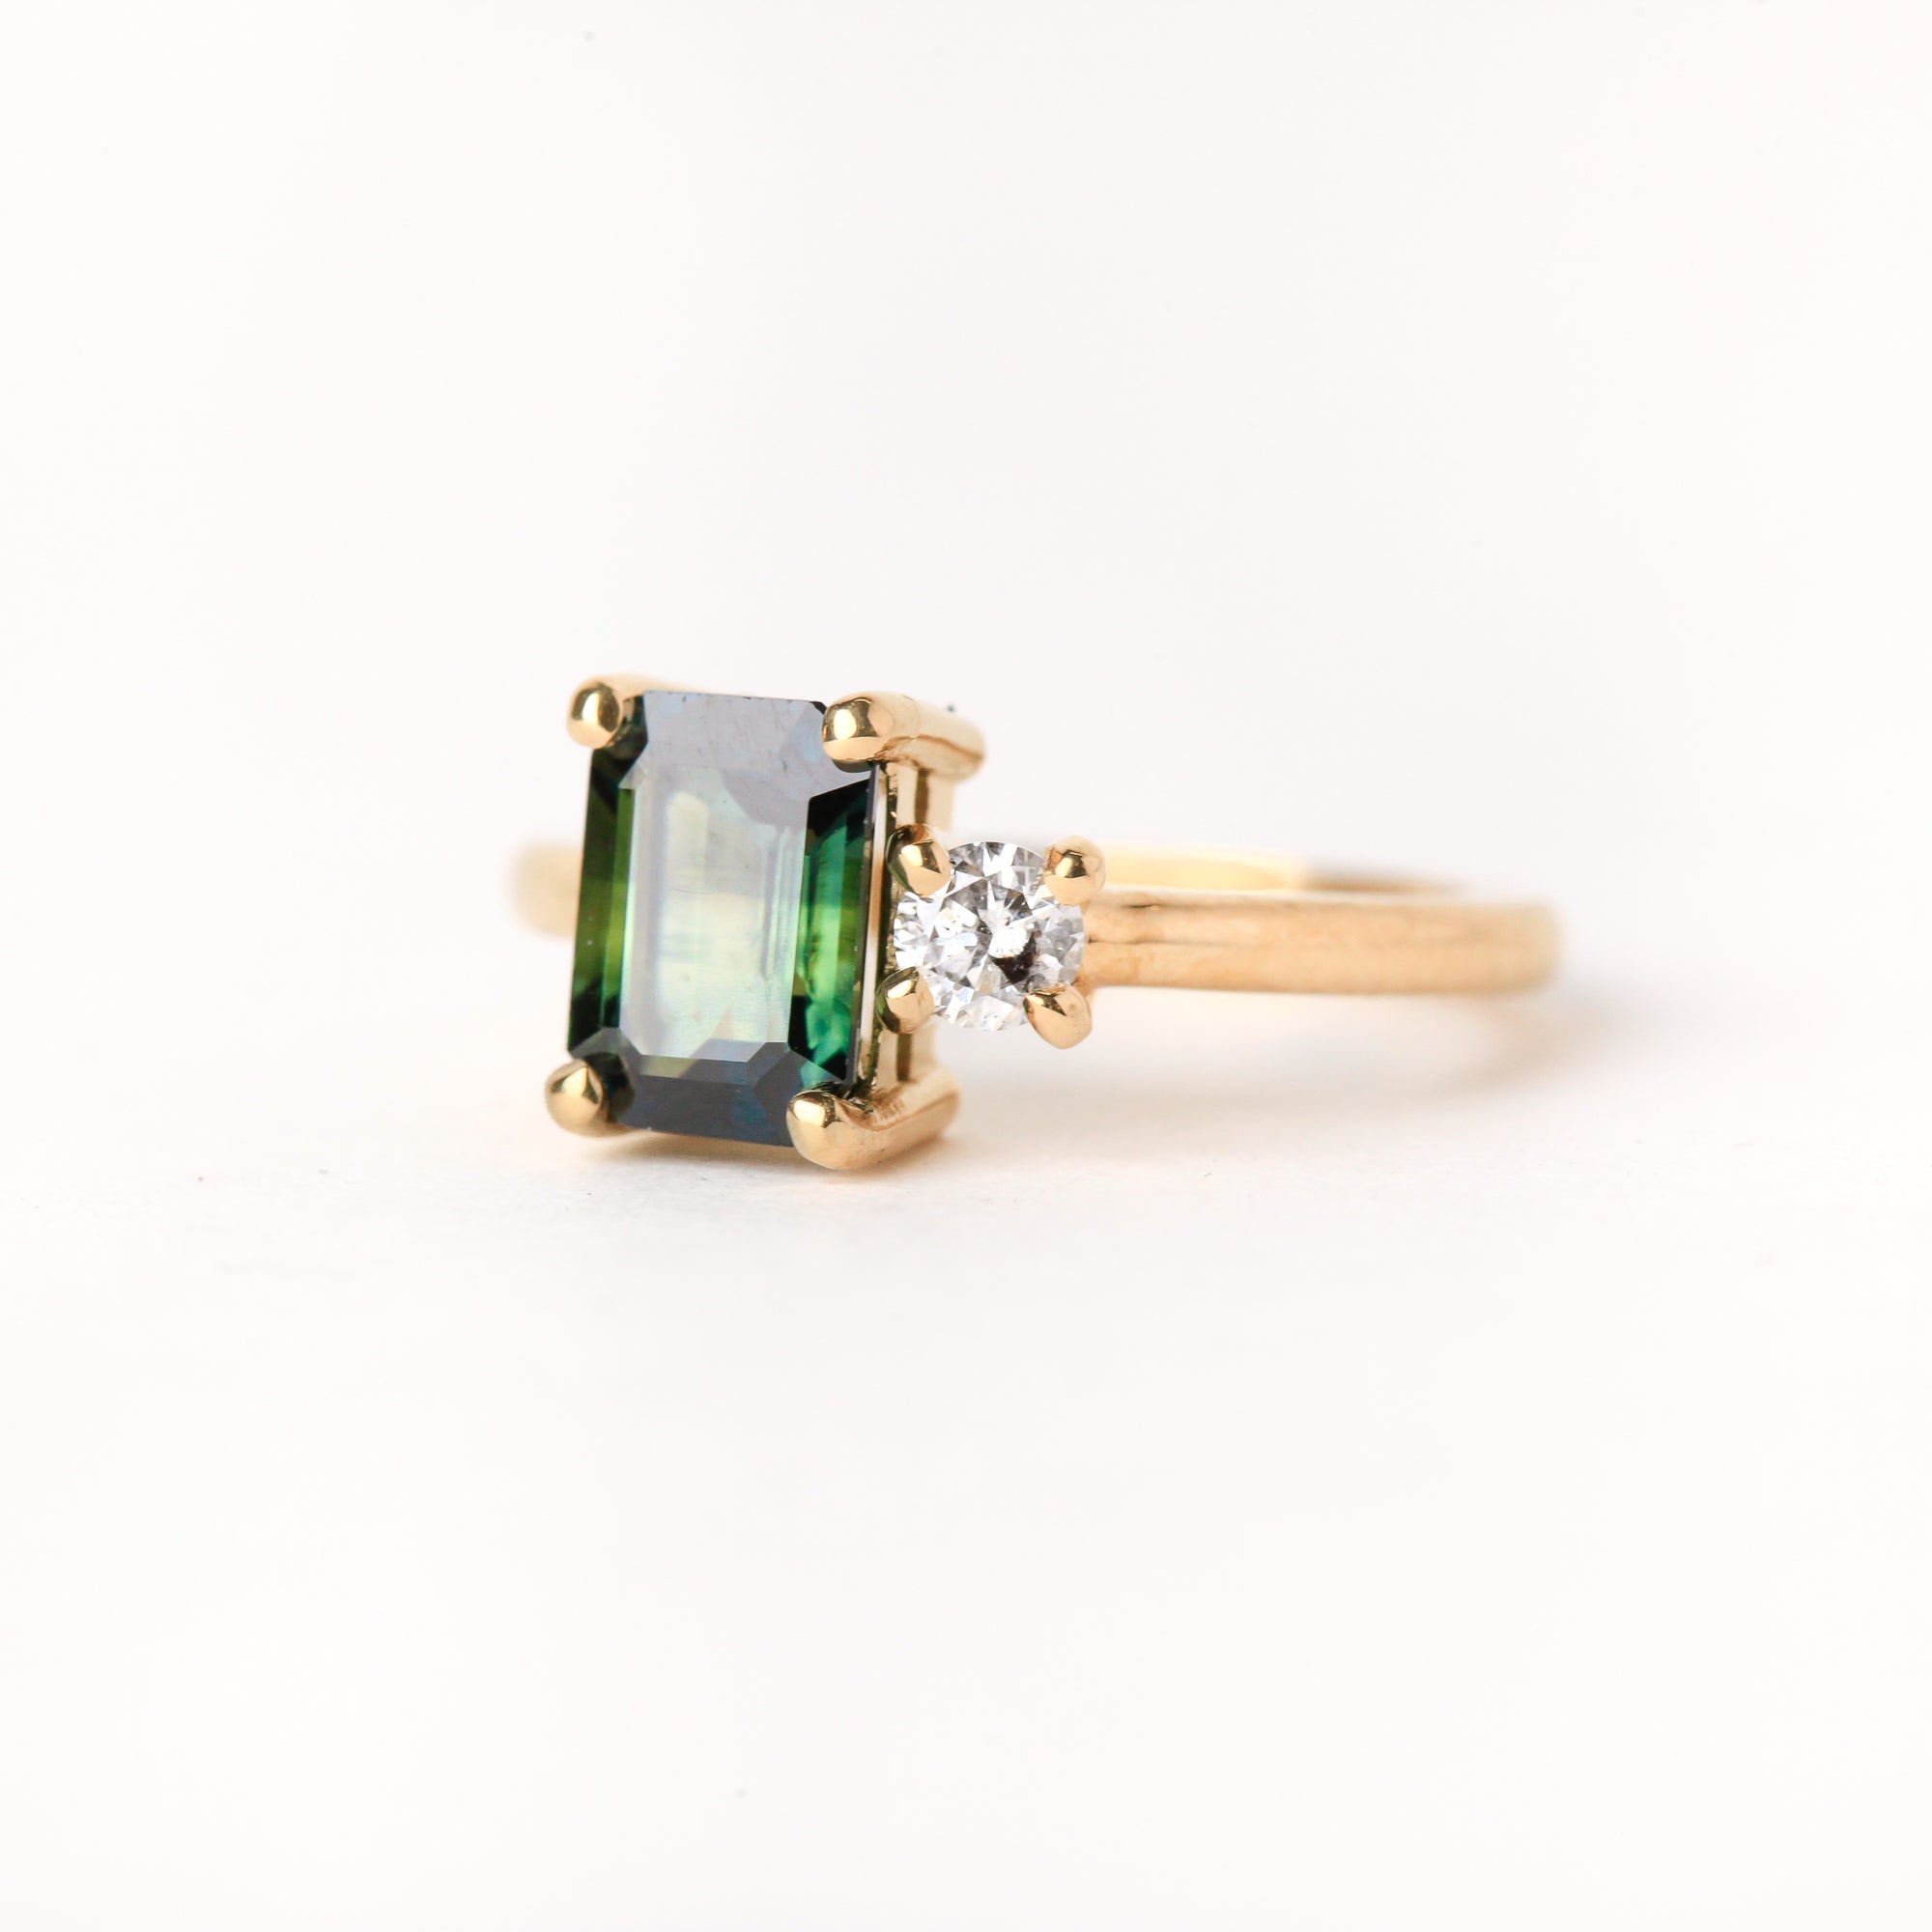 Ethically sourced emerald cut sapphire along side a white diamond. Crafted with recycled, refined gold. Made in Melbourne. 